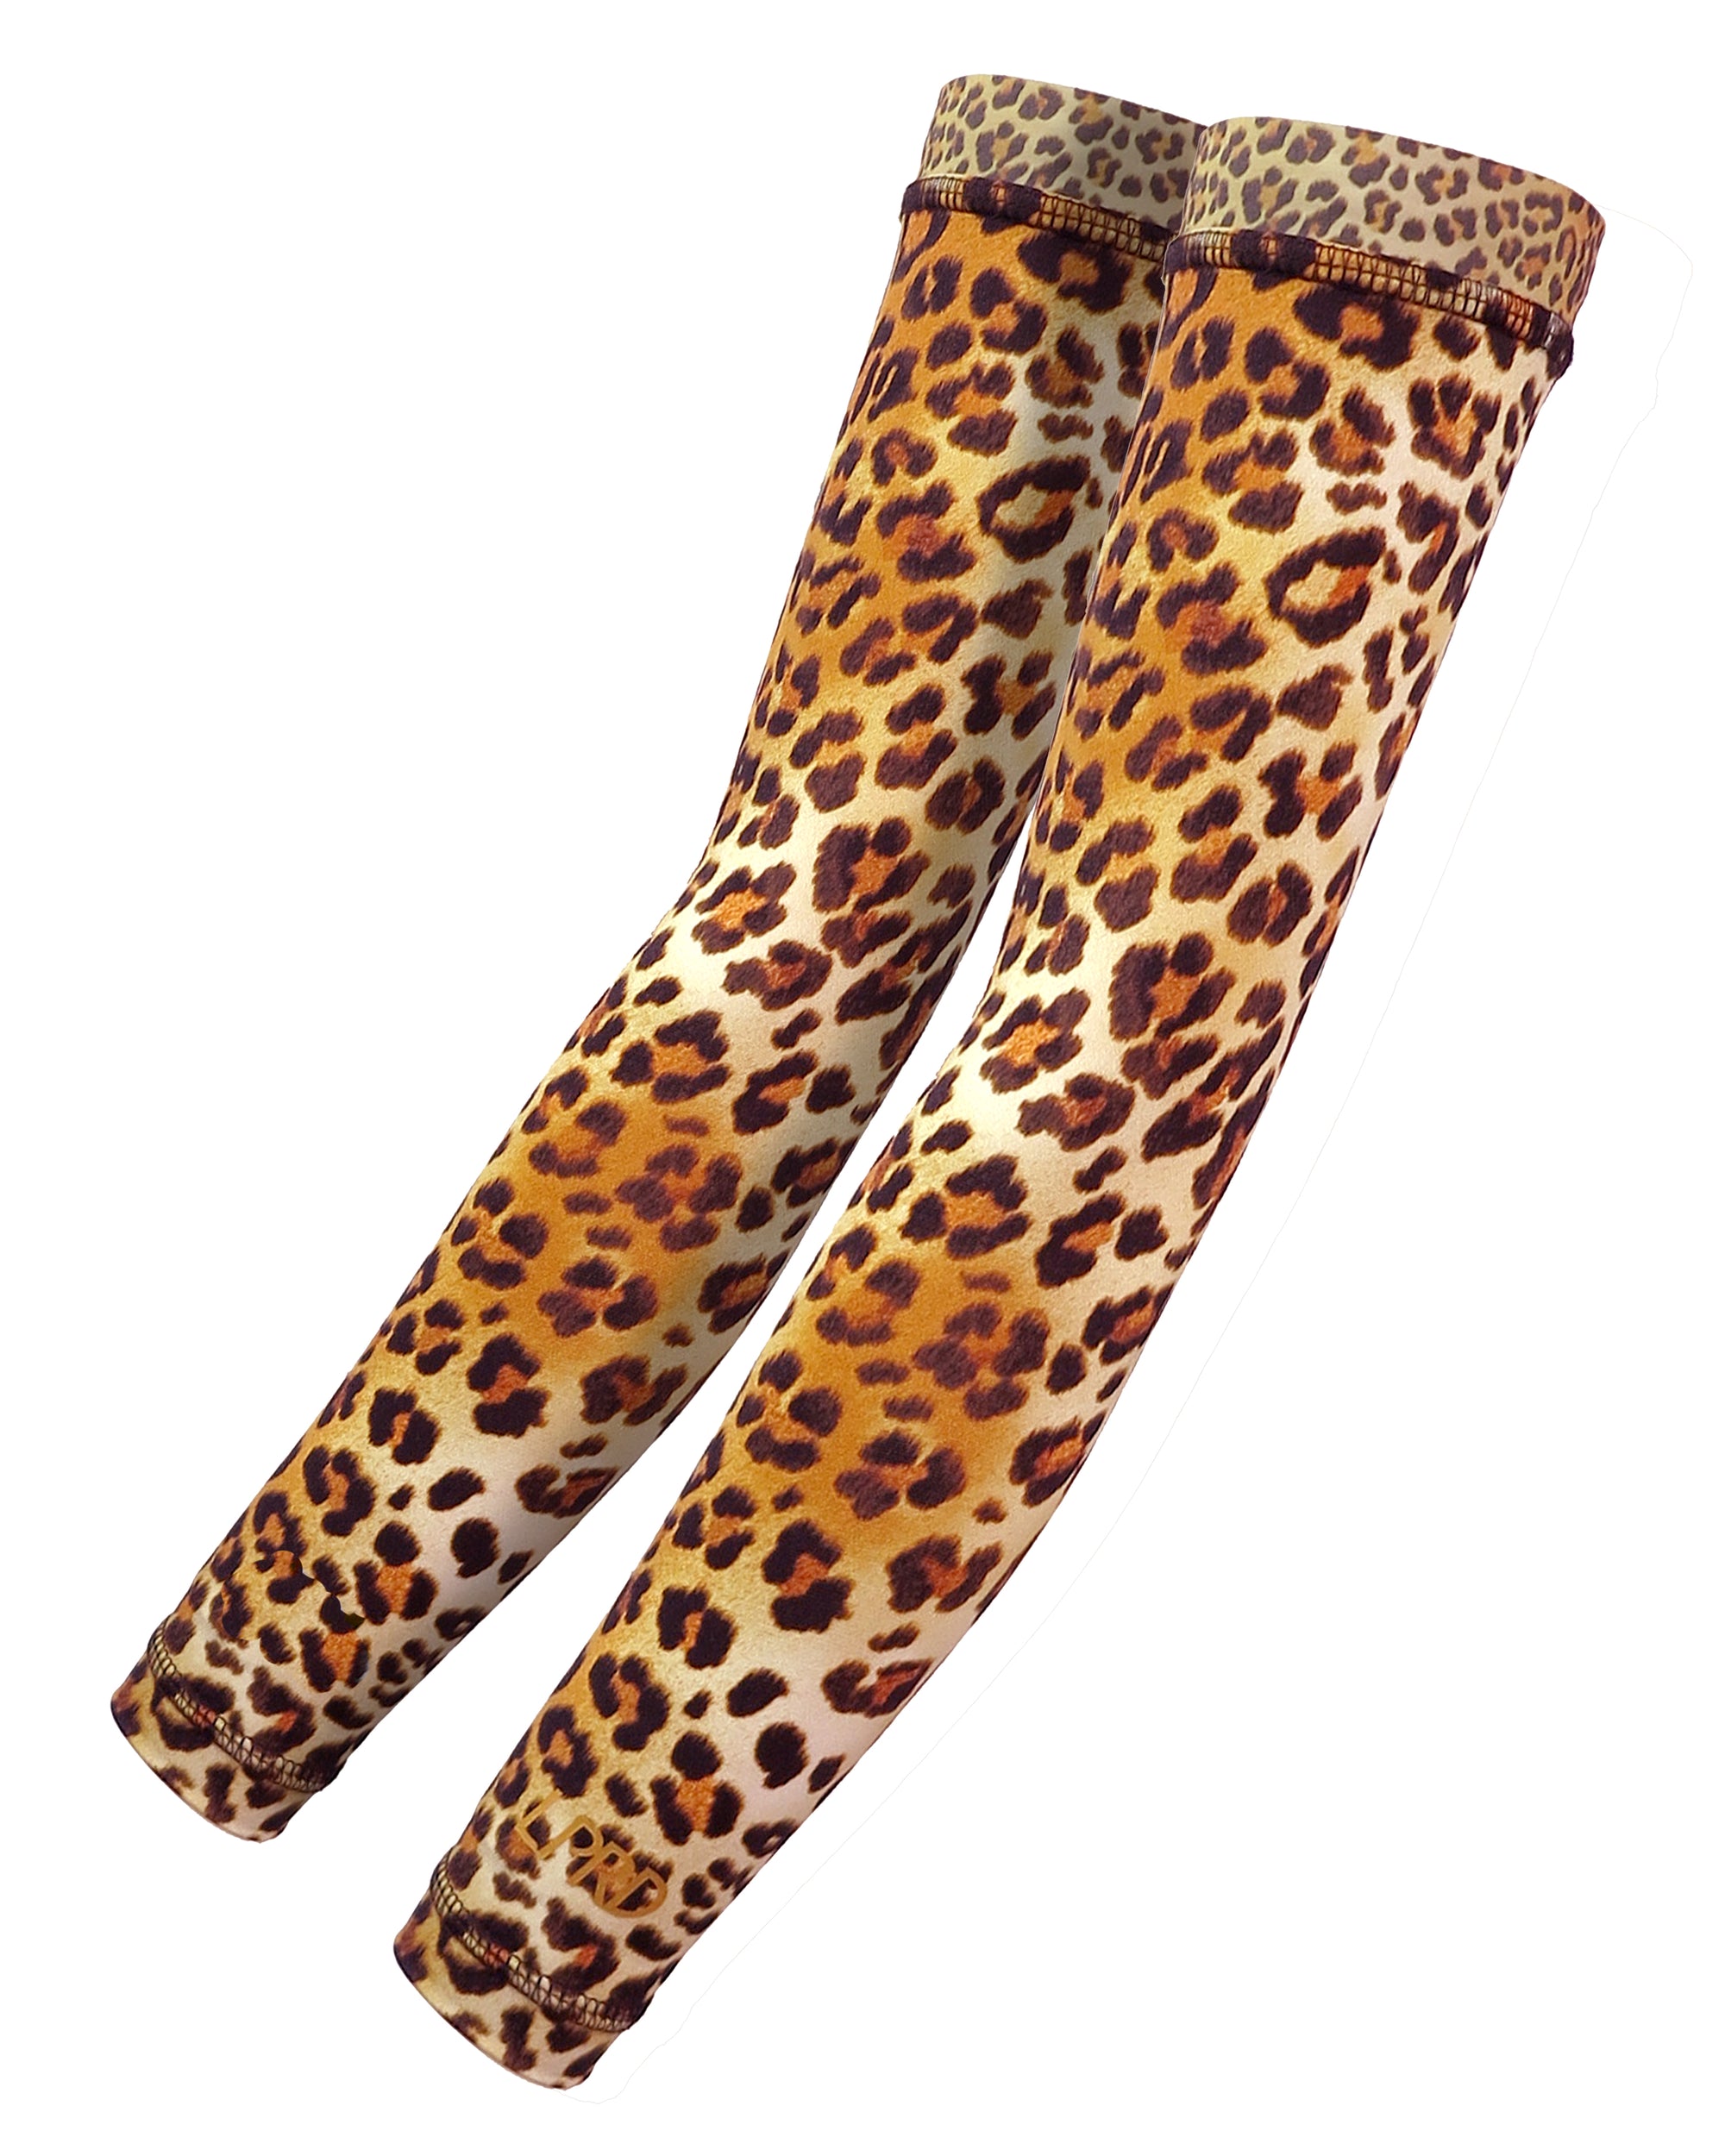 Arm Warmers for cycling in Signature Leopard Print